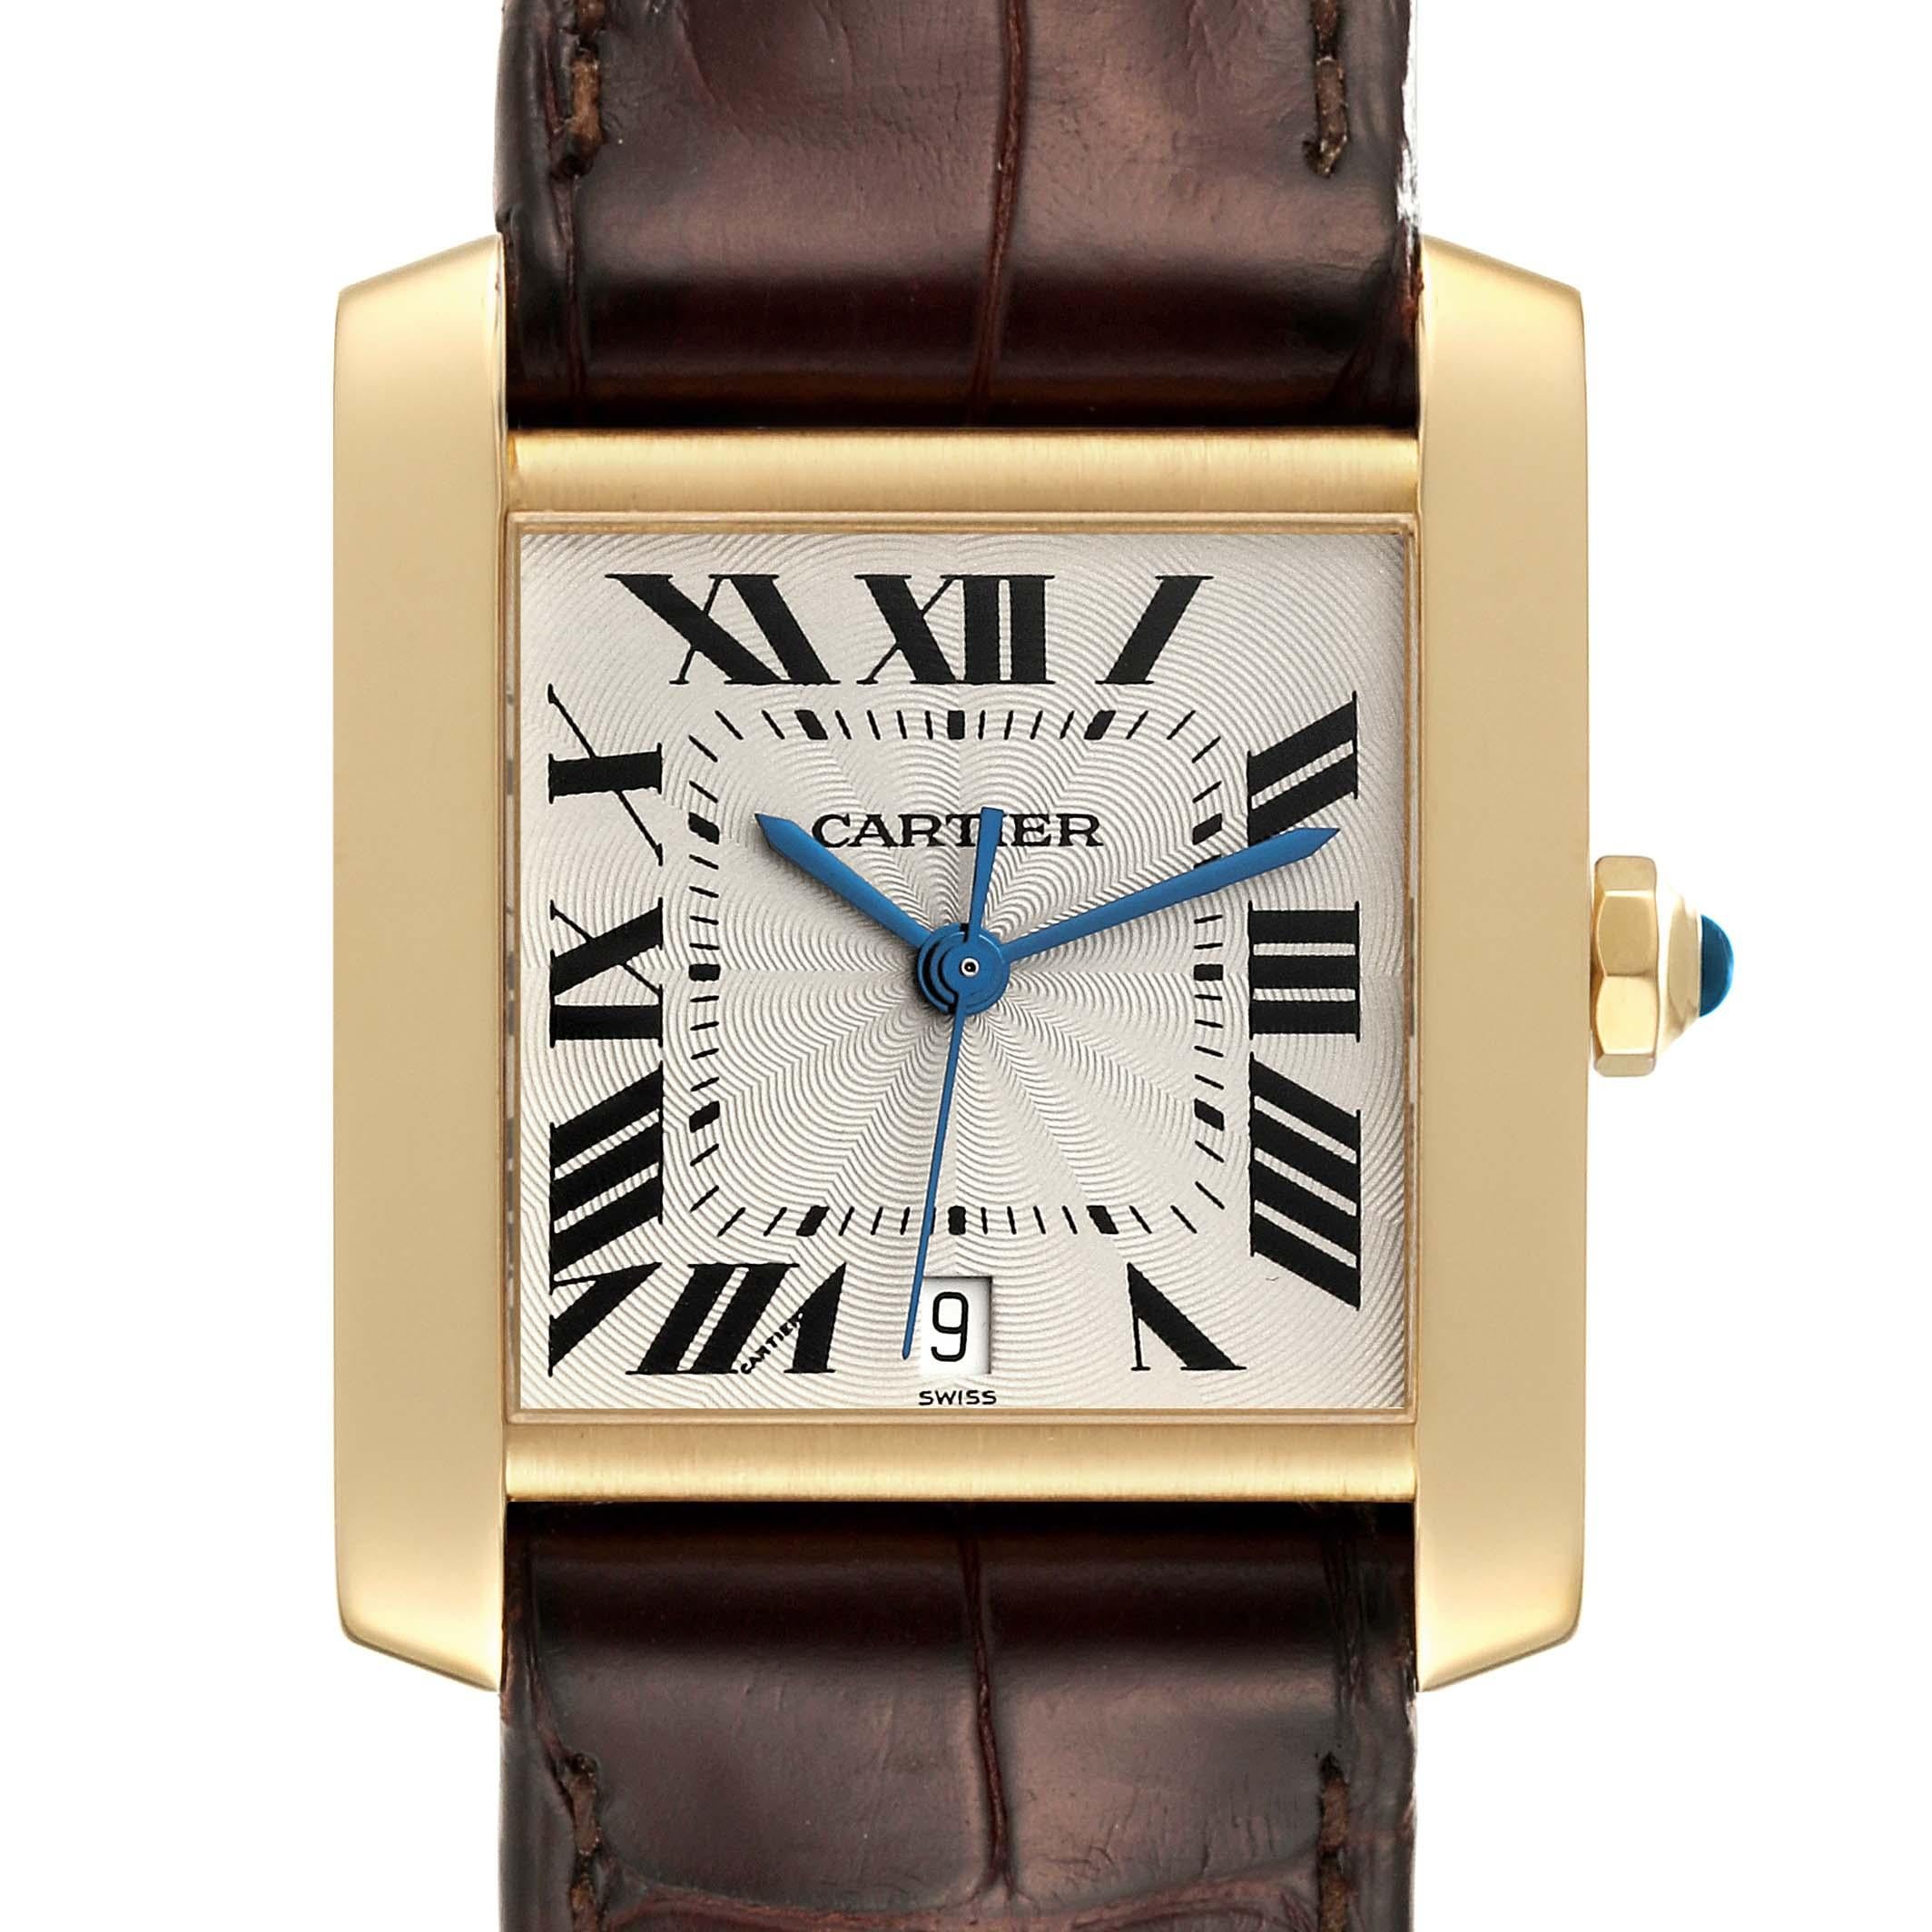 Cartier Tank Francaise Large Yellow Gold Automatic Mens Watch W5000156. Automatic self-winding movement. Rectangular 28.0 x 32.0 mm case. Octagonal 18K yellow gold crown set with a blue sapphire cabochon. . Scratch resistant sapphire crystal. Silver